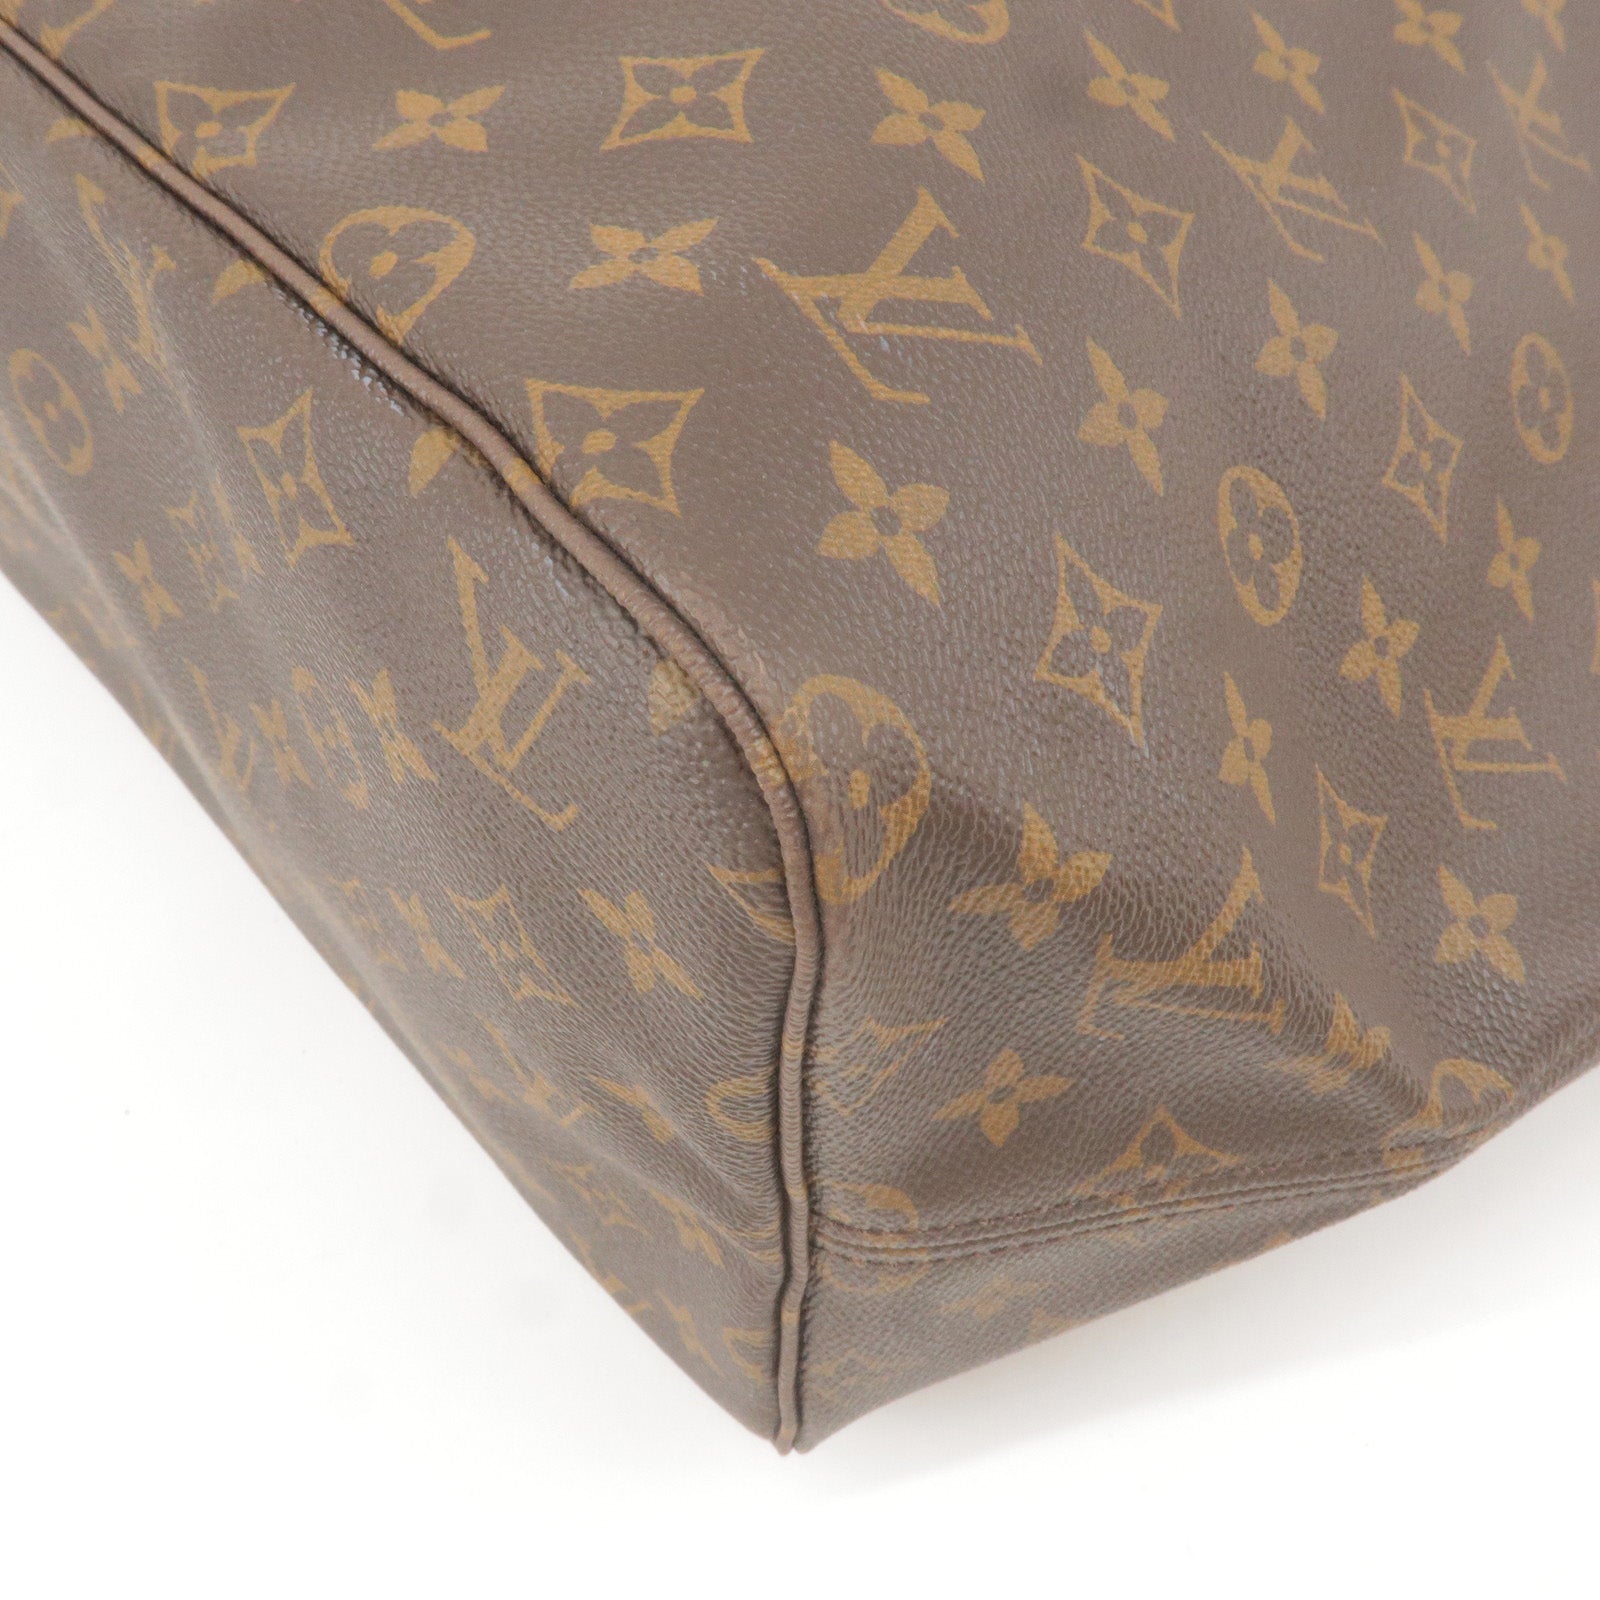 Louis Vuitton Neverfull vs. Graceful vs. Artsy Review: Which of